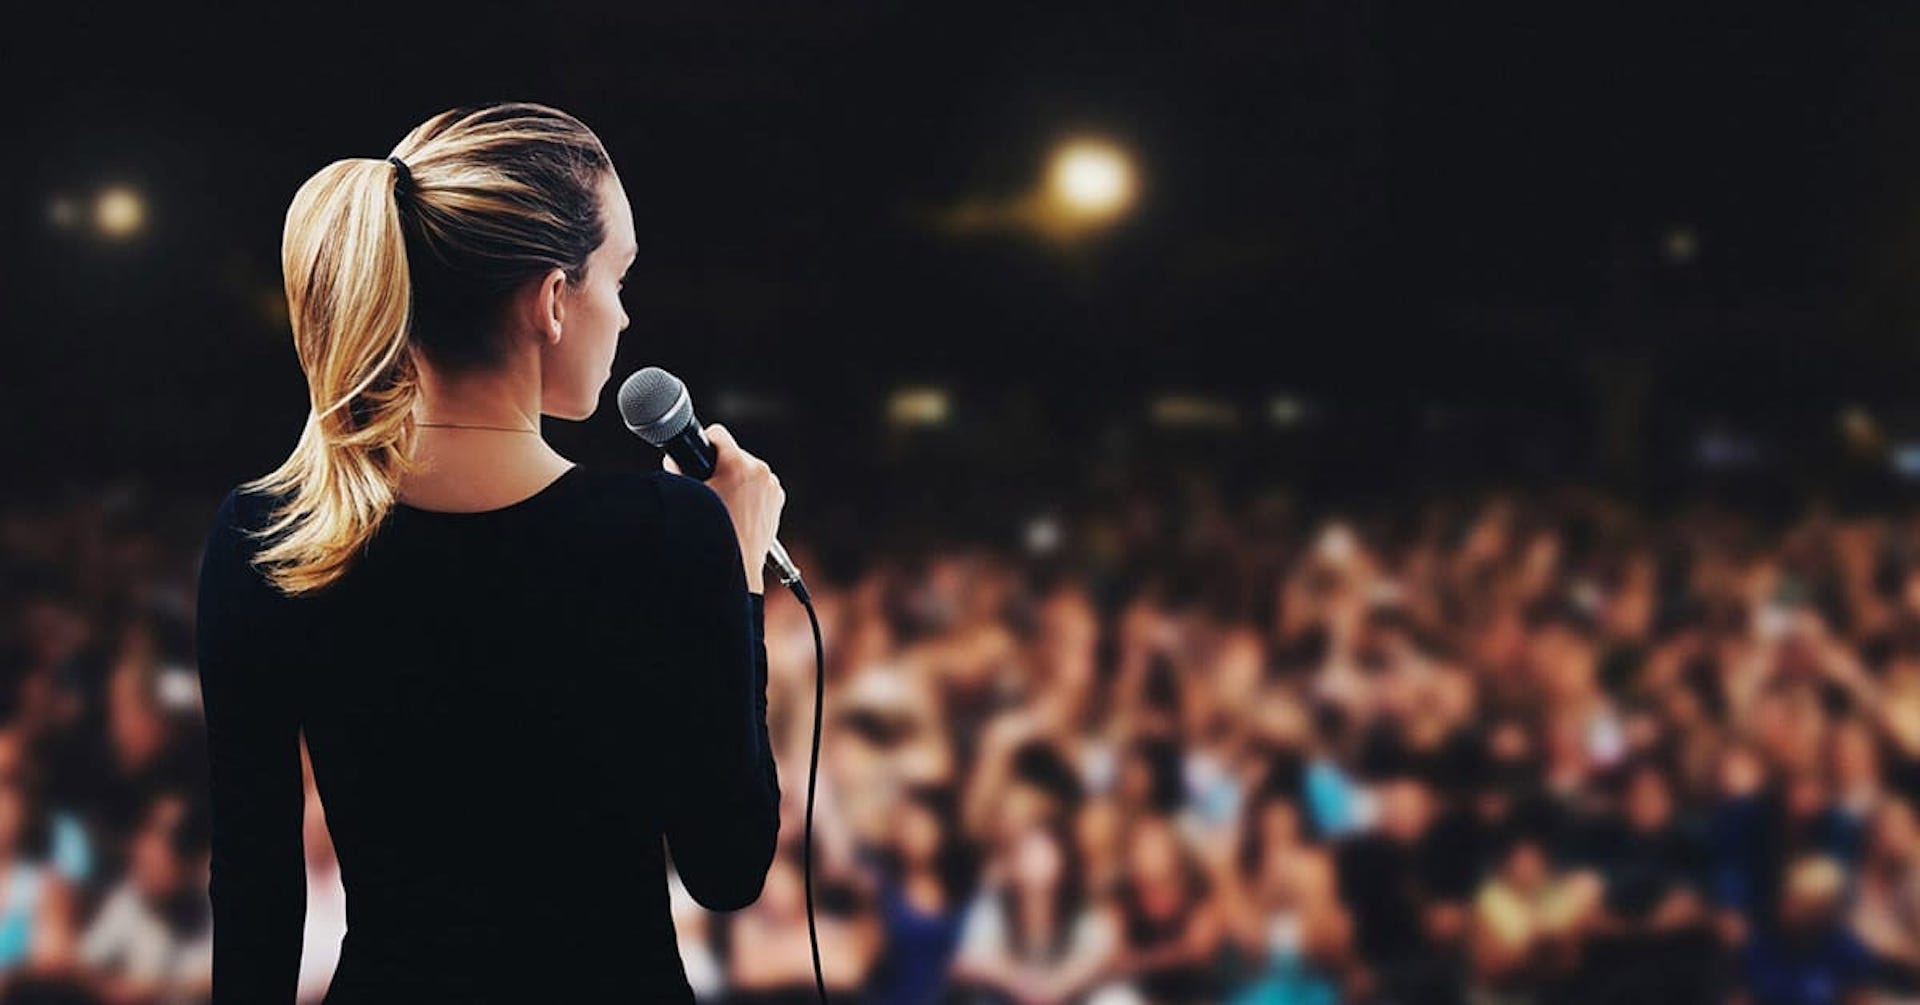 Woman with blonde hair doing a presentation to a large audience